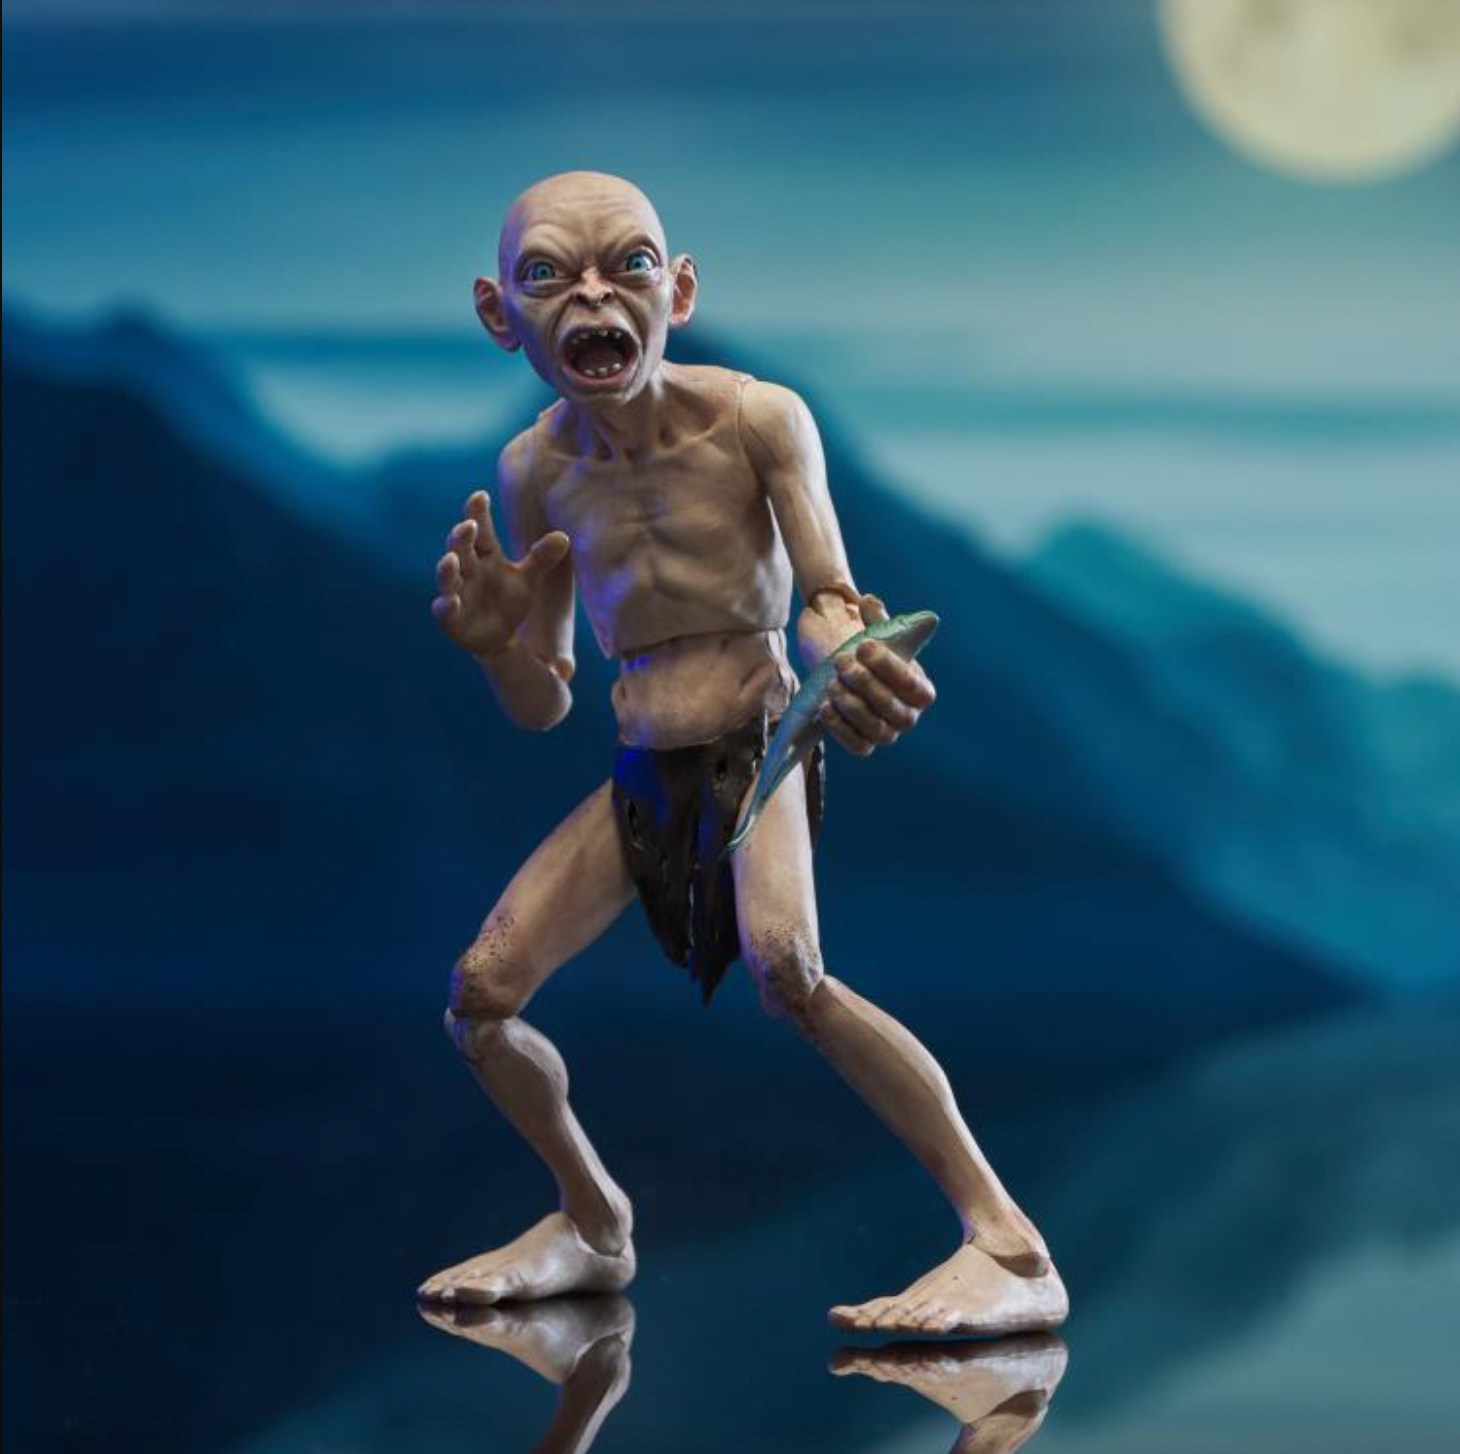 The Lord of the Rings Gollum Deluxe Figure – LotR Premium Store